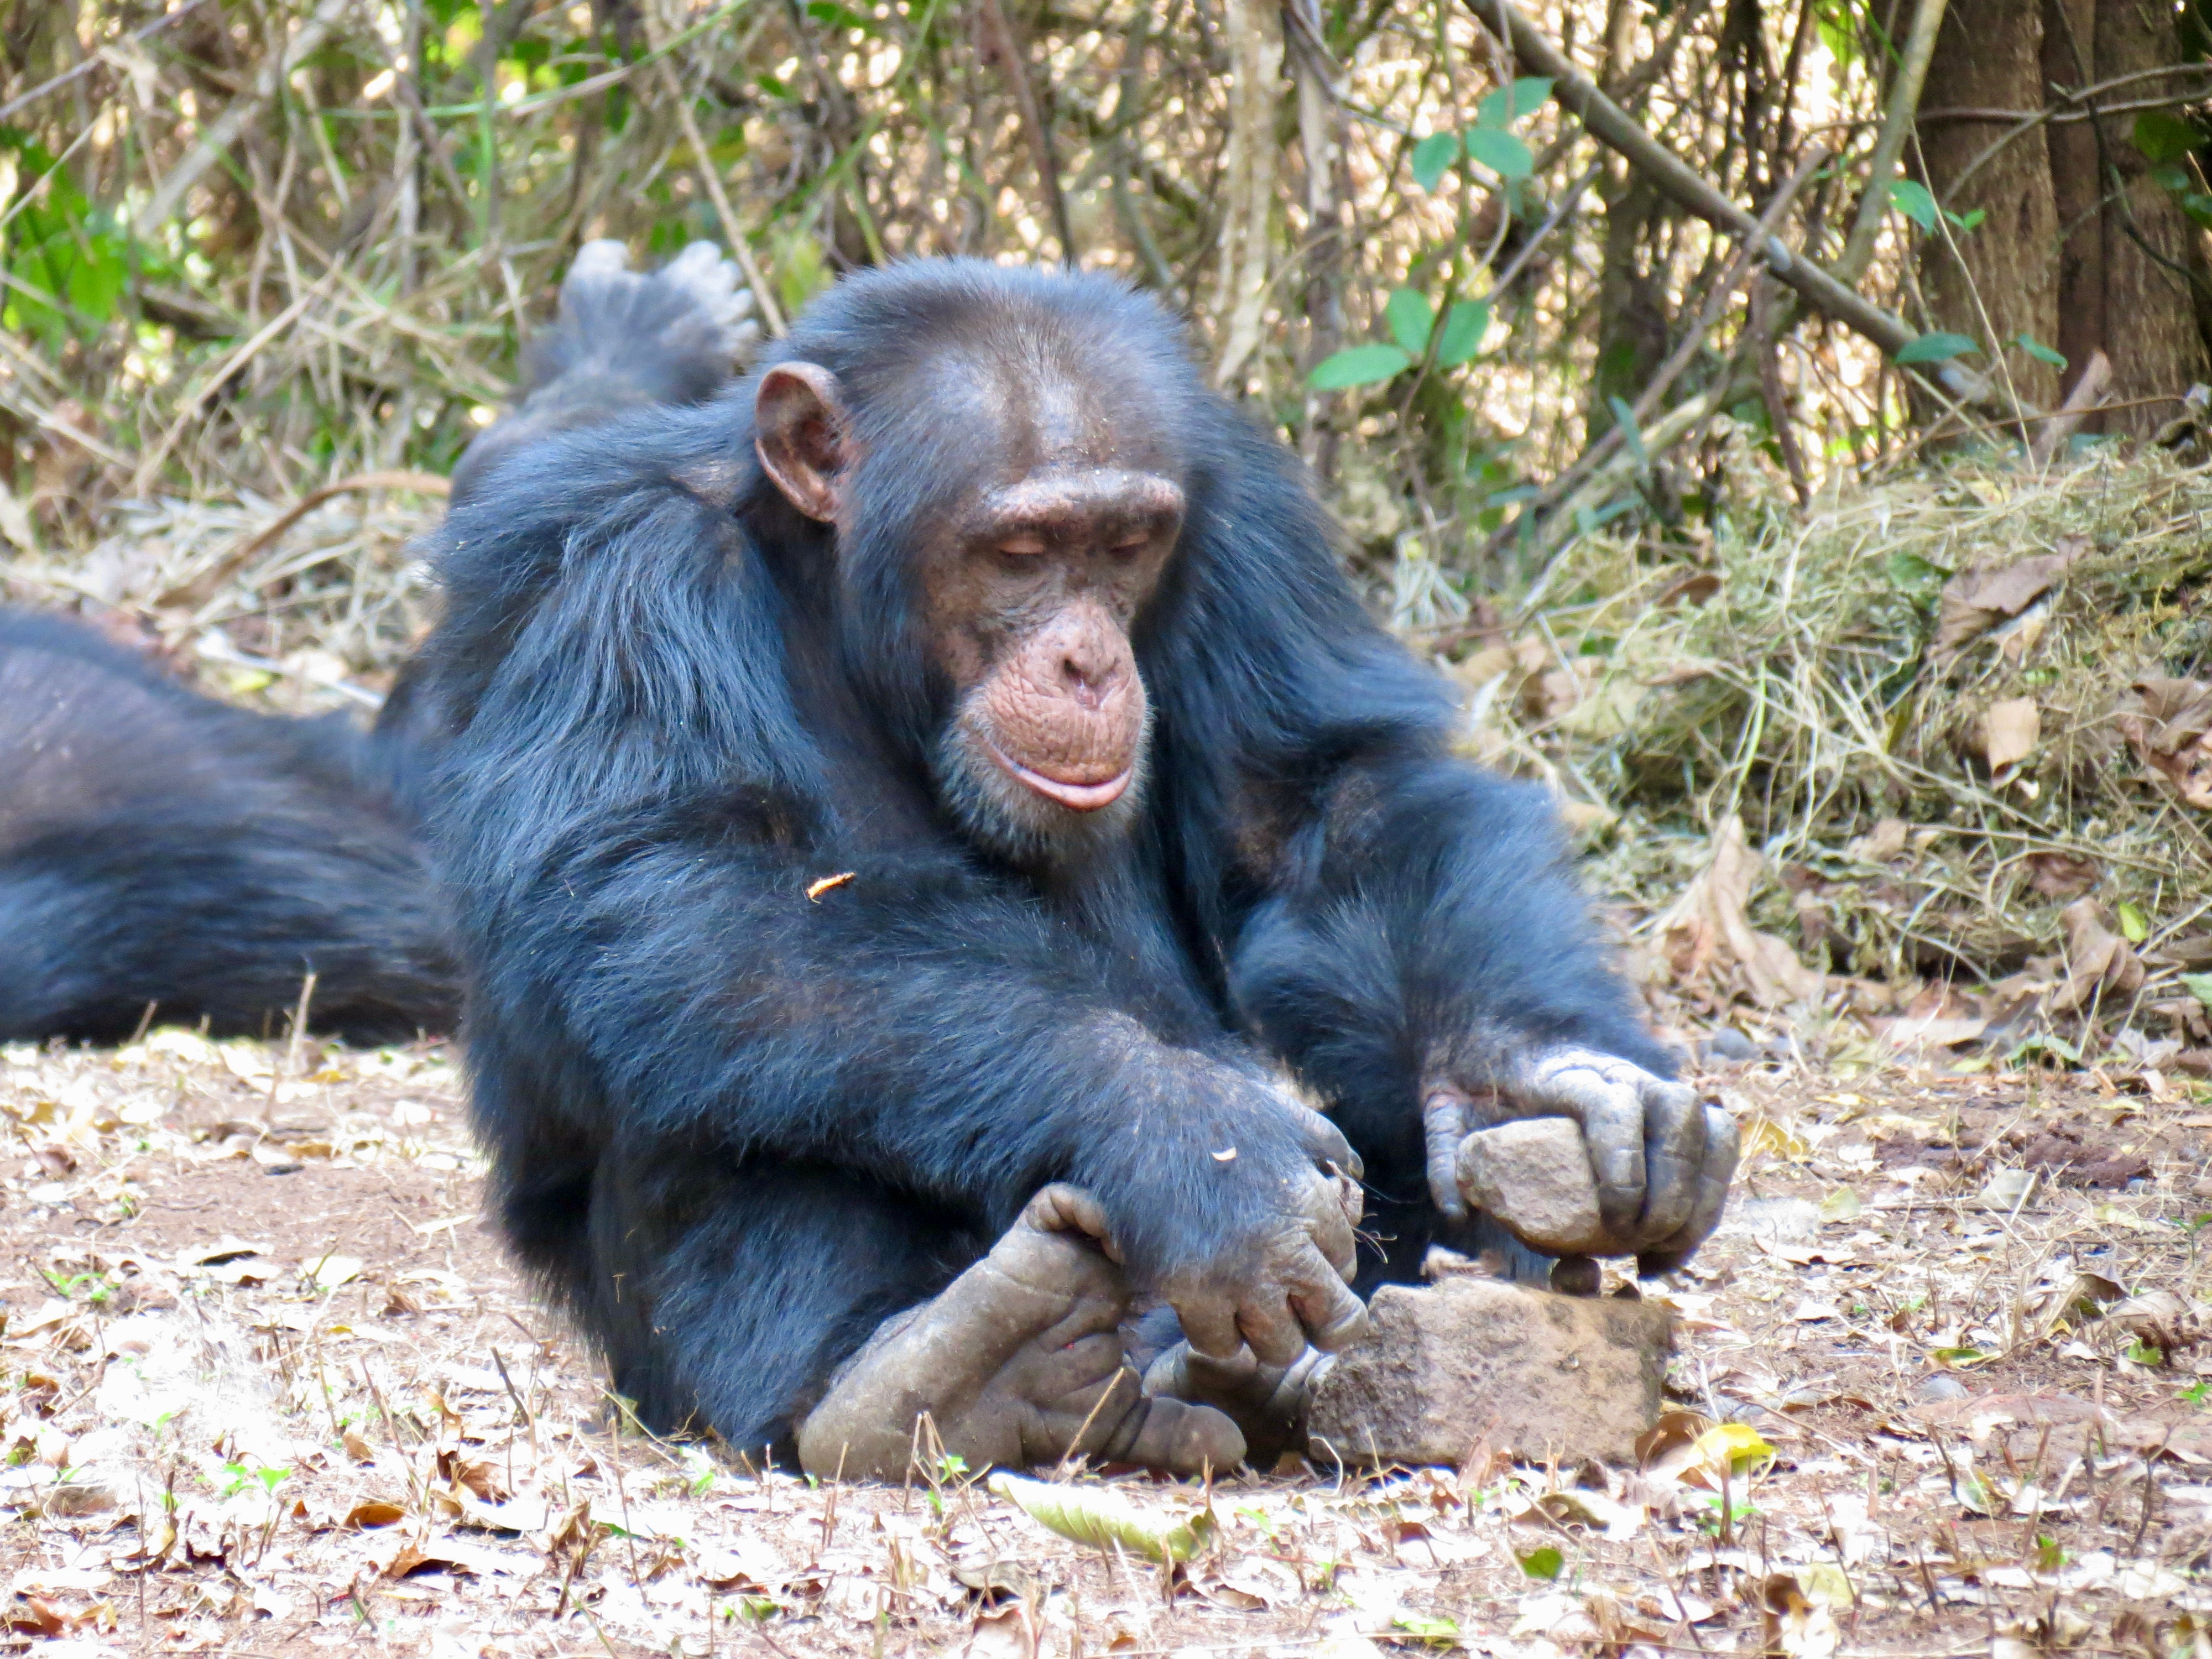 A chimpanzee in Guinea uses a hammer and anvil arrangement of stones to crack open a nut